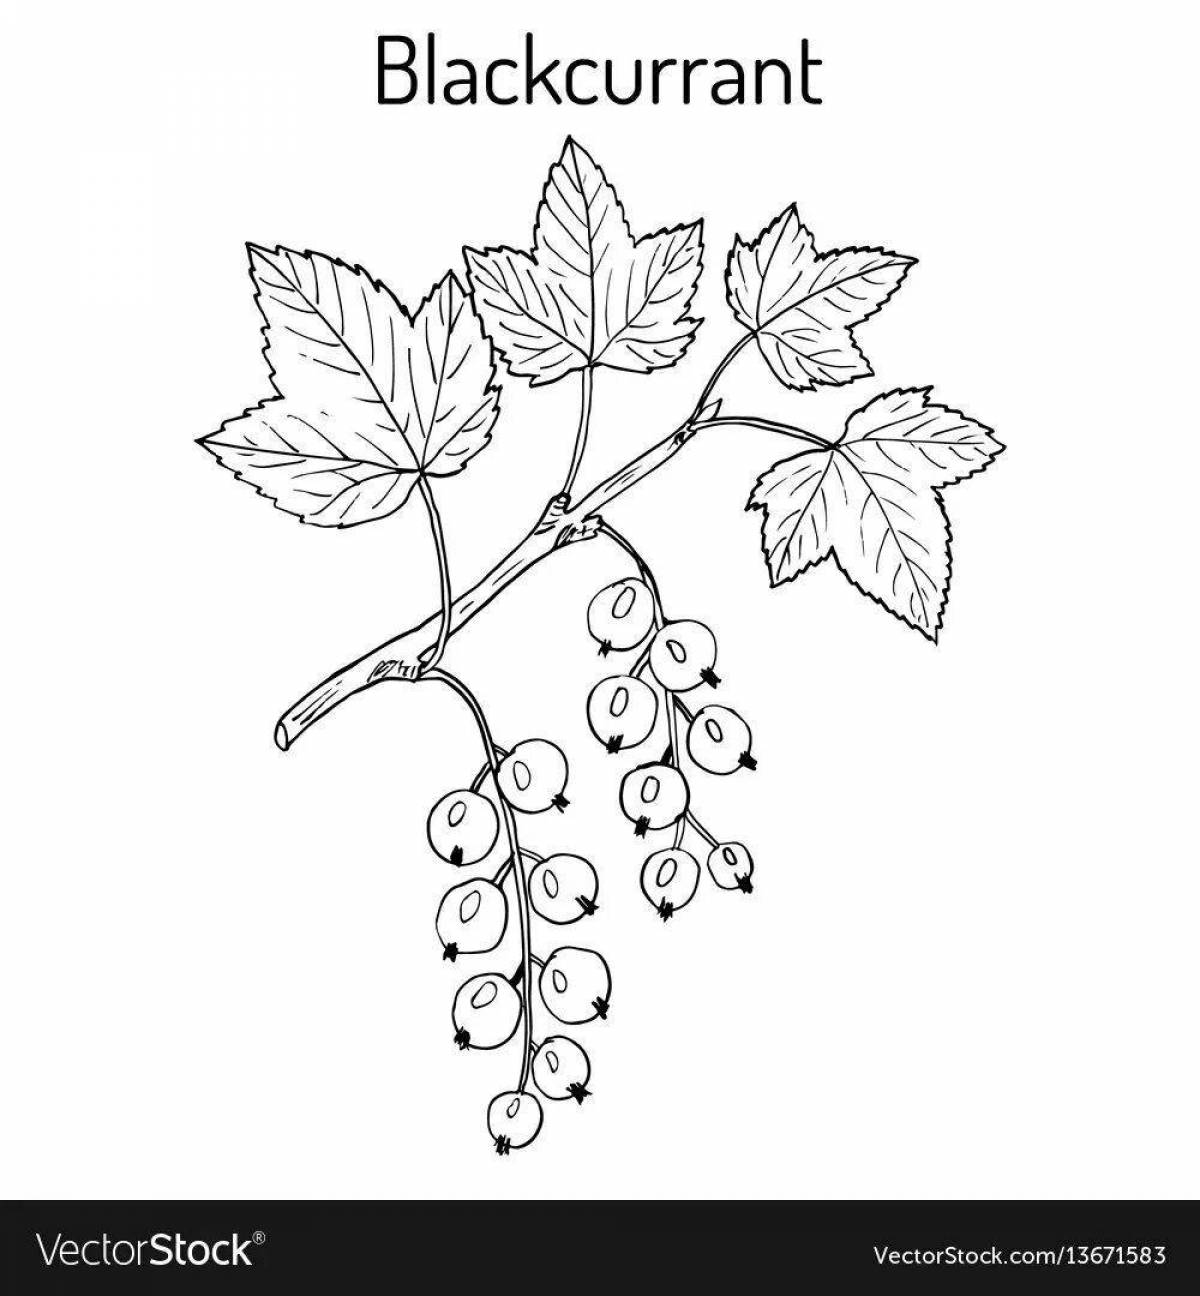 Merry currant coloring book for kids